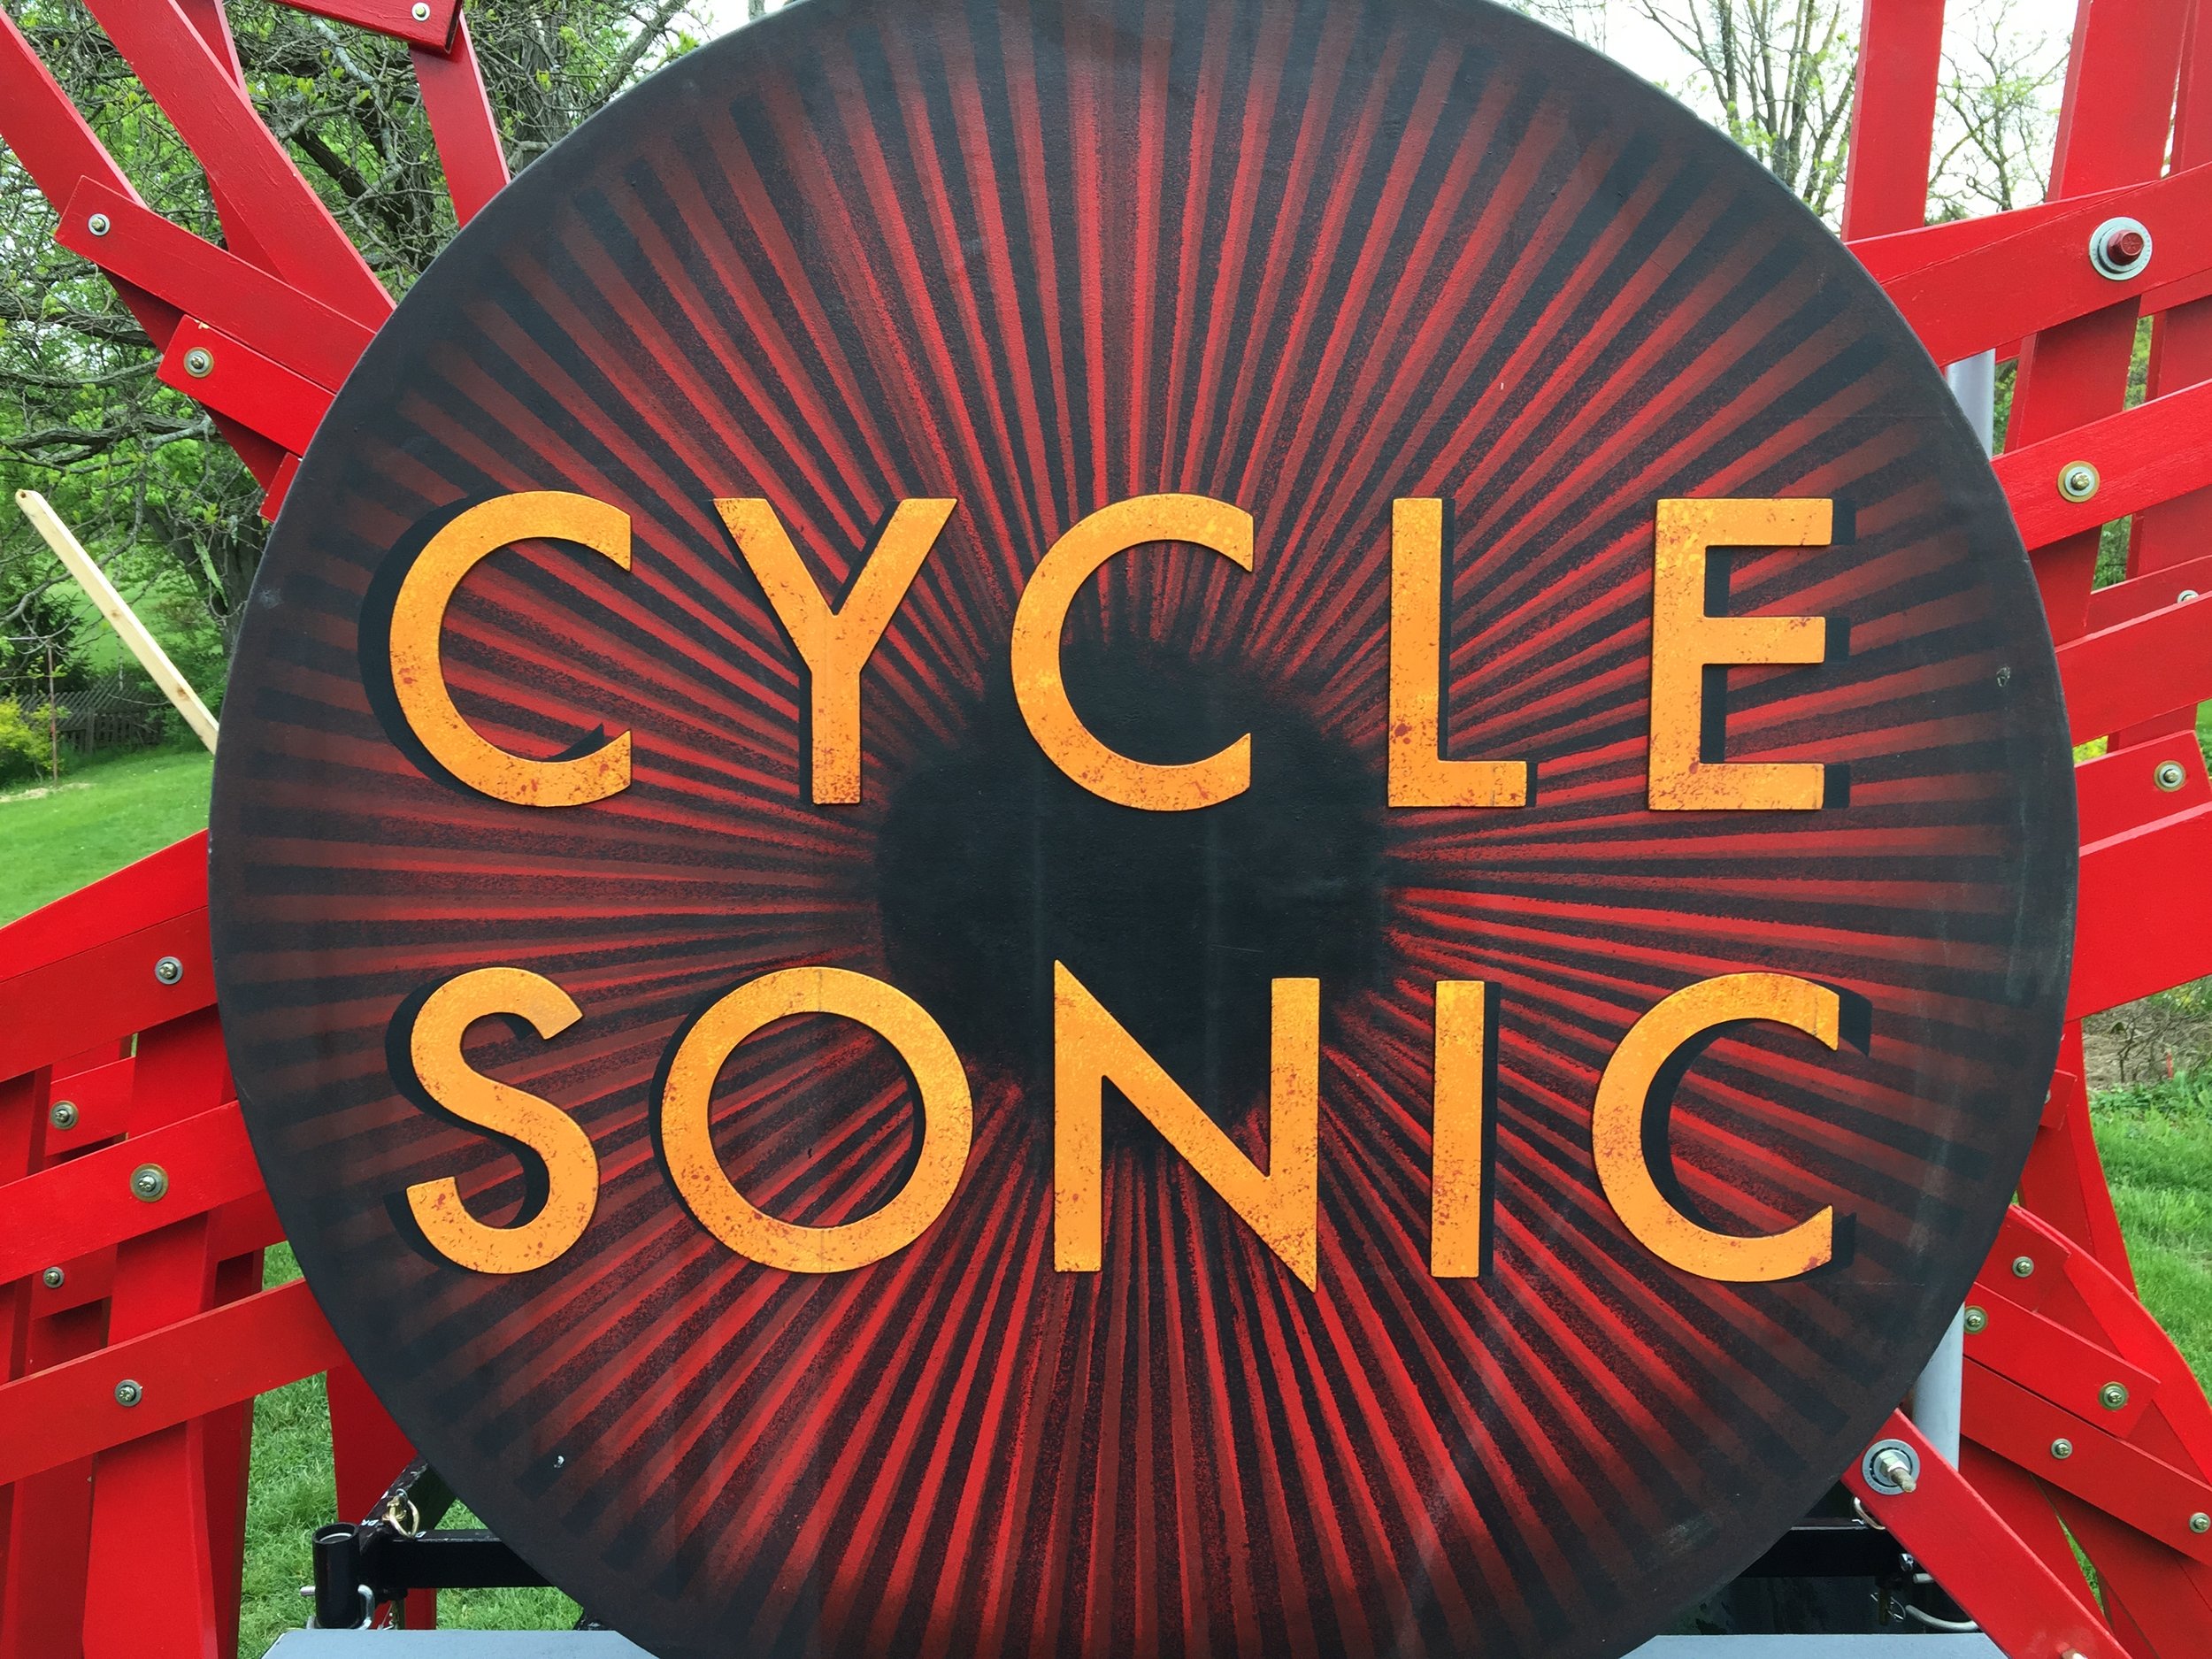 The Sonic Cycle